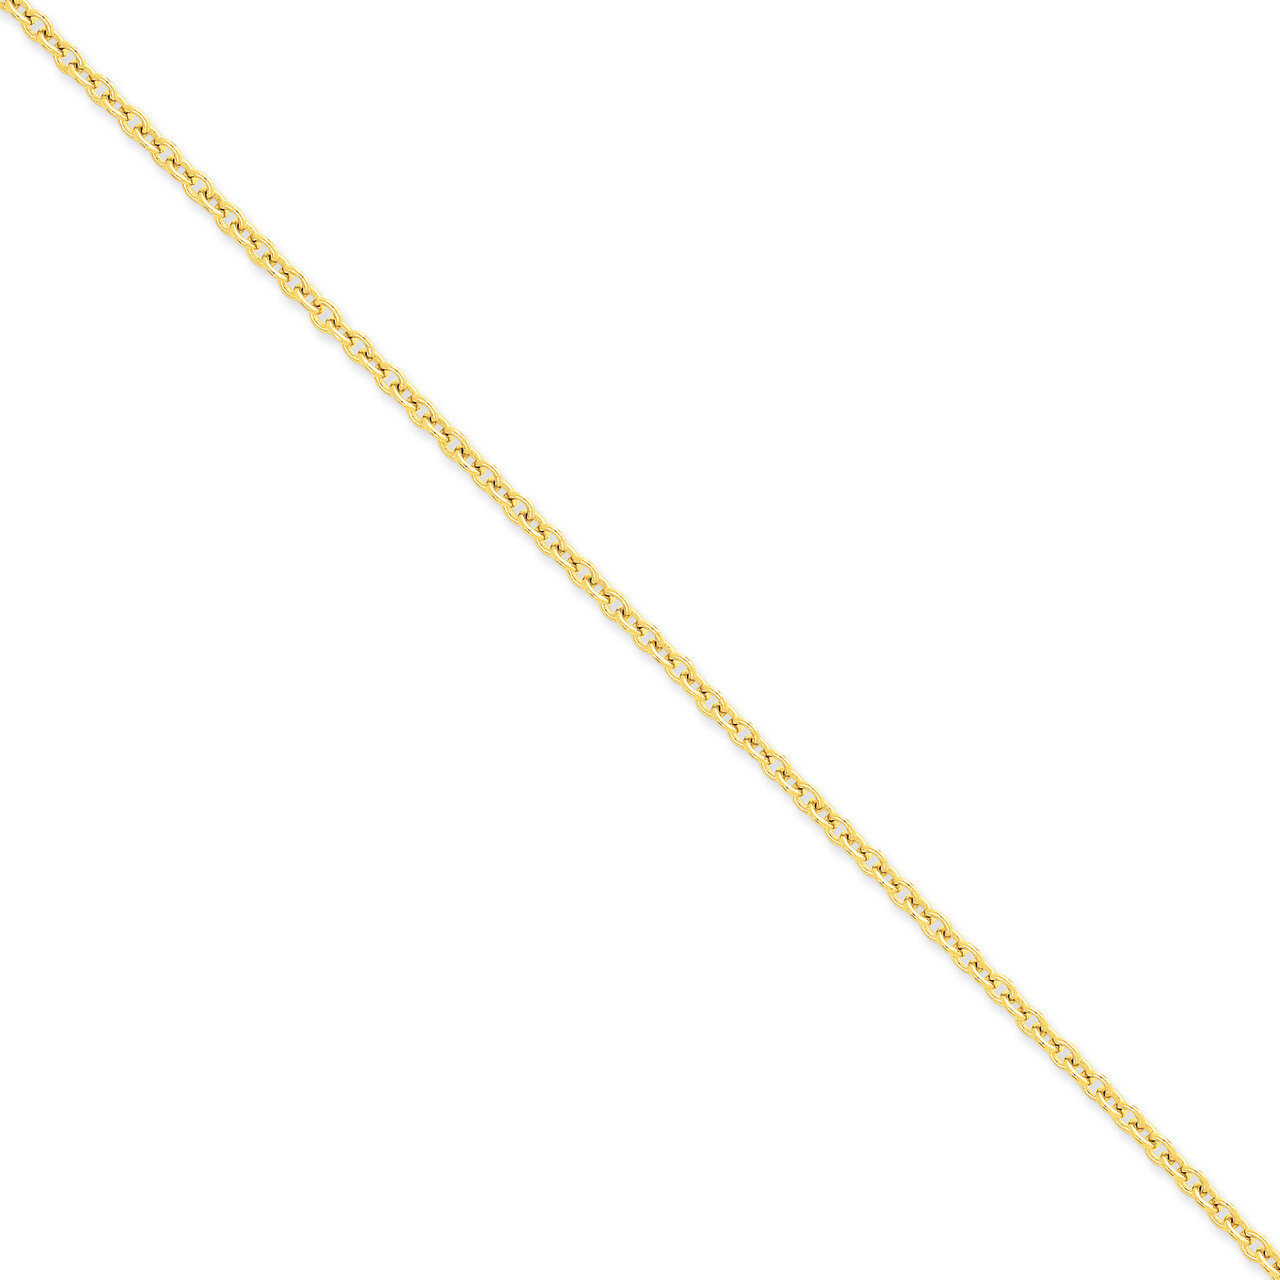 3.2mm Cable Chain 20 Inch 14k Gold PEN218-20